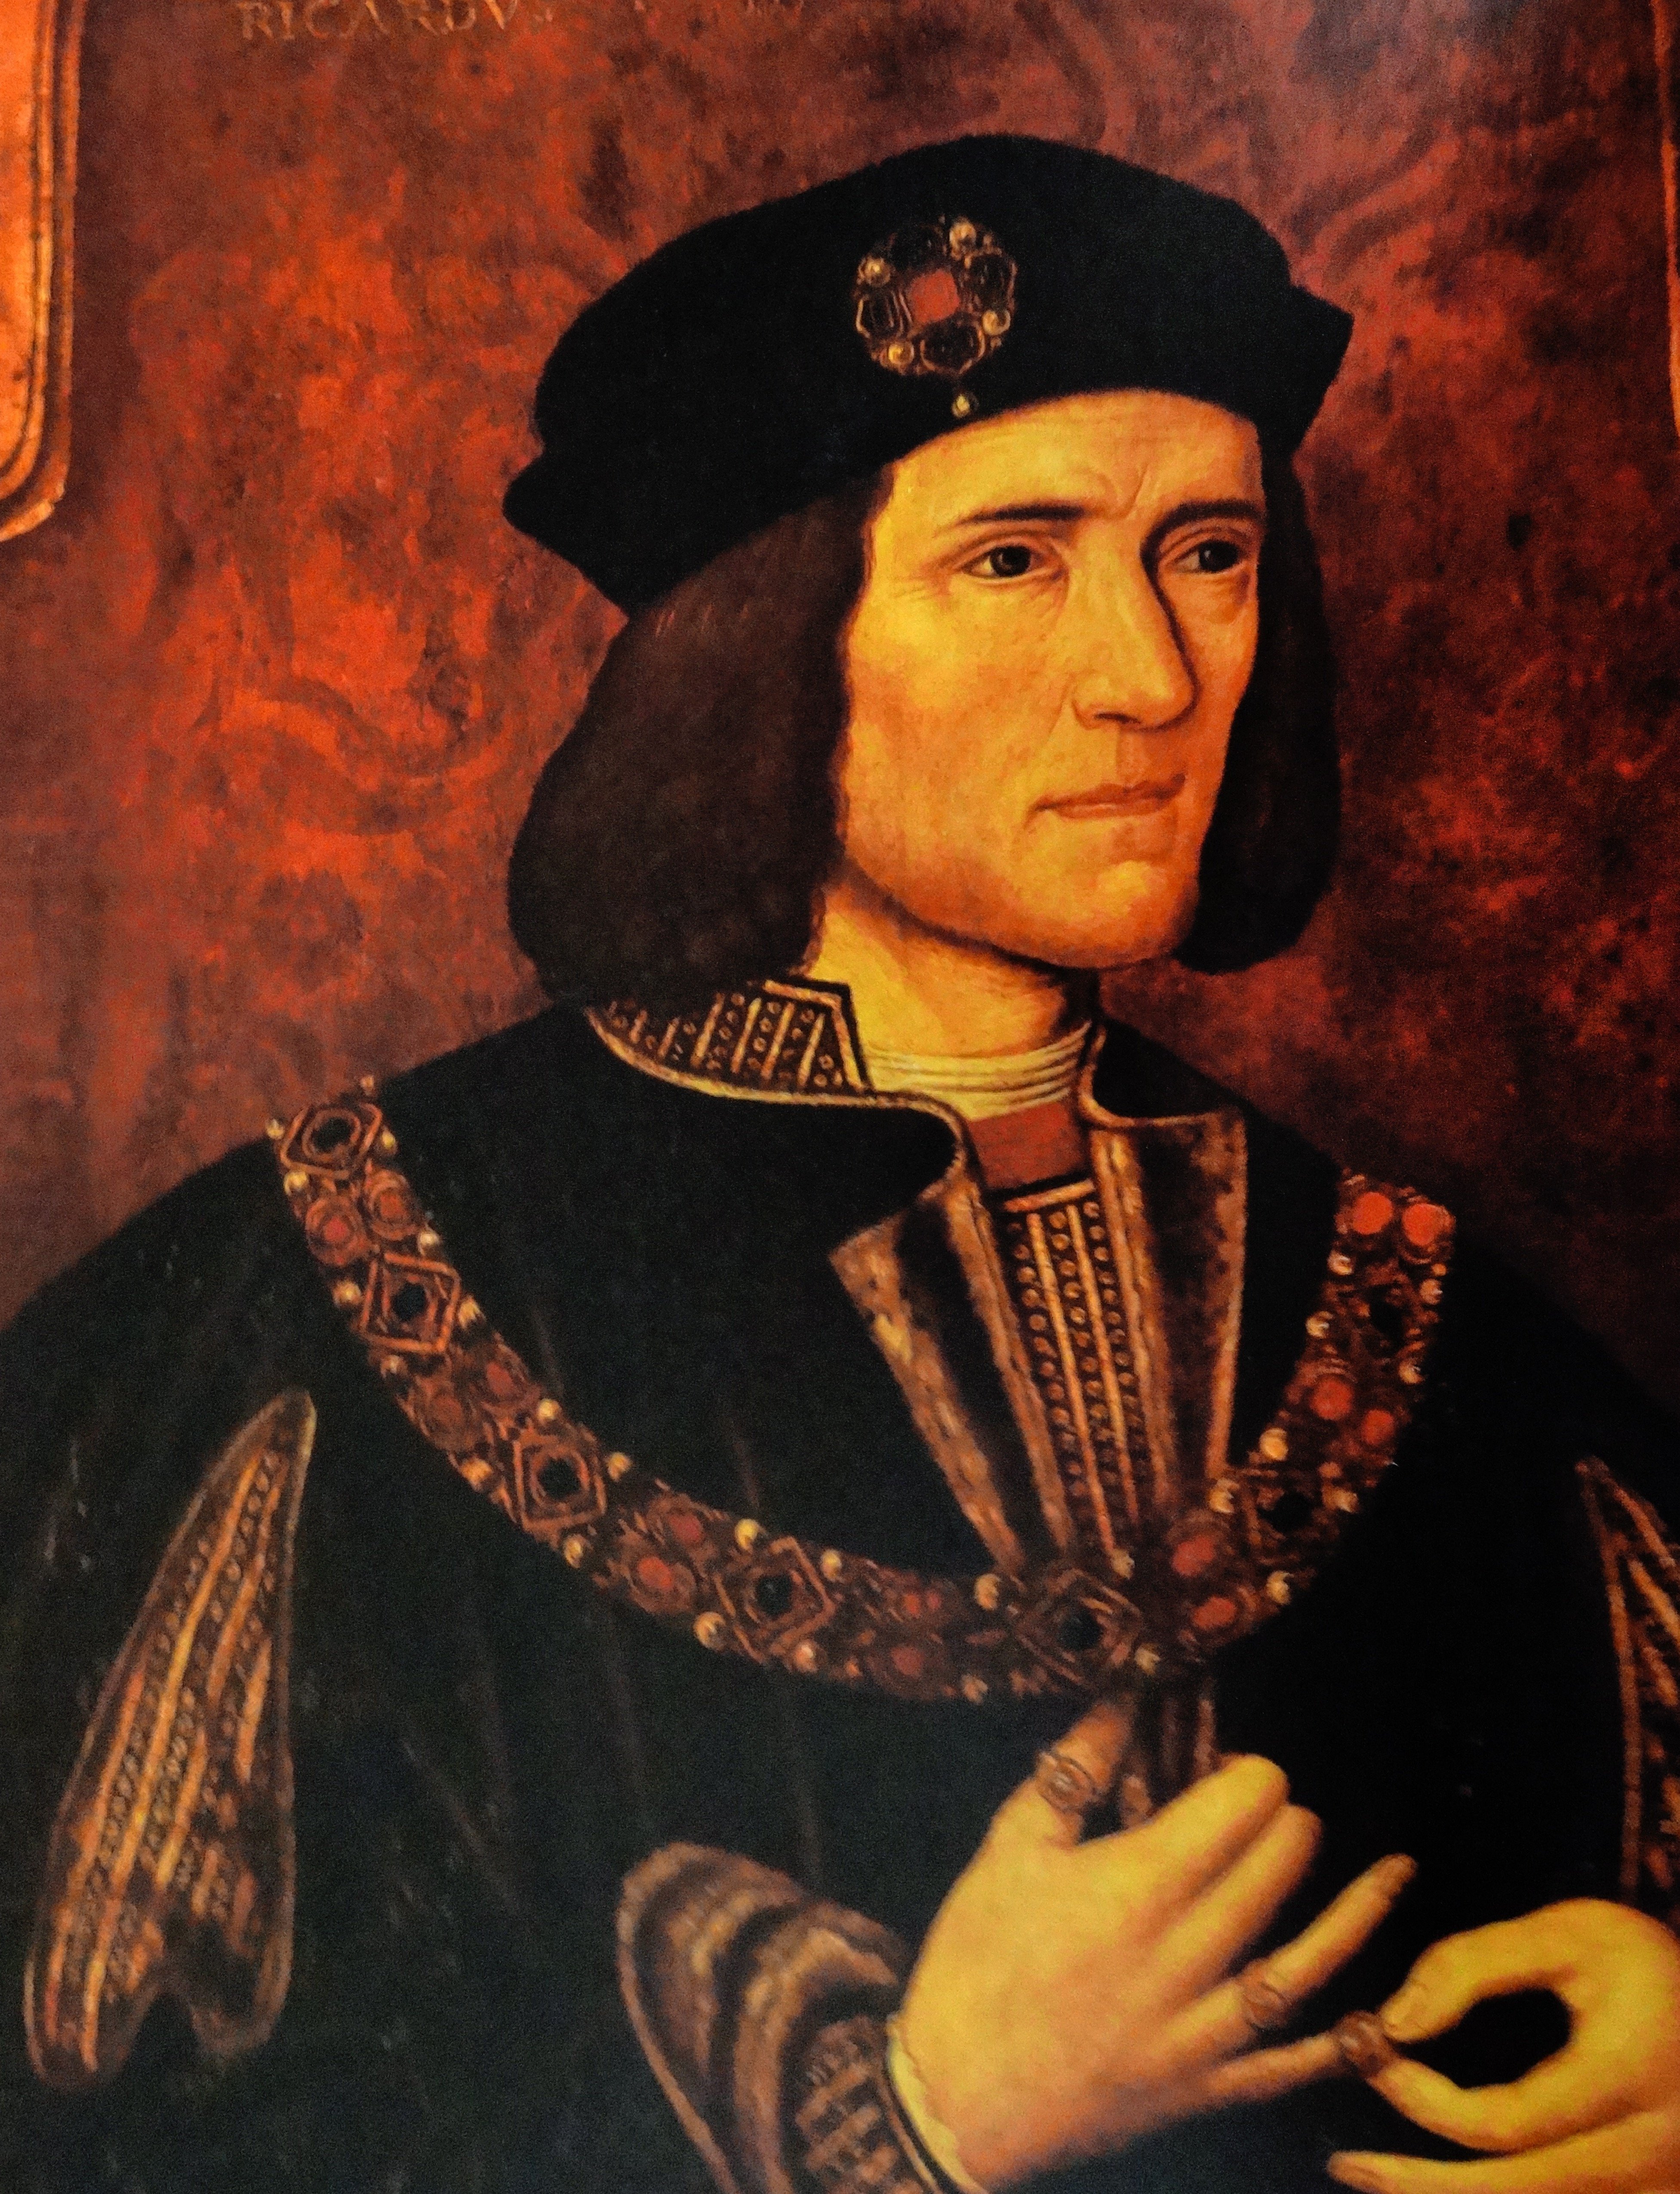 Portrait of Richard III of England who was King of England until his death in the Battle of Bosworth Field in the 15th Century. / Source: Getty Images